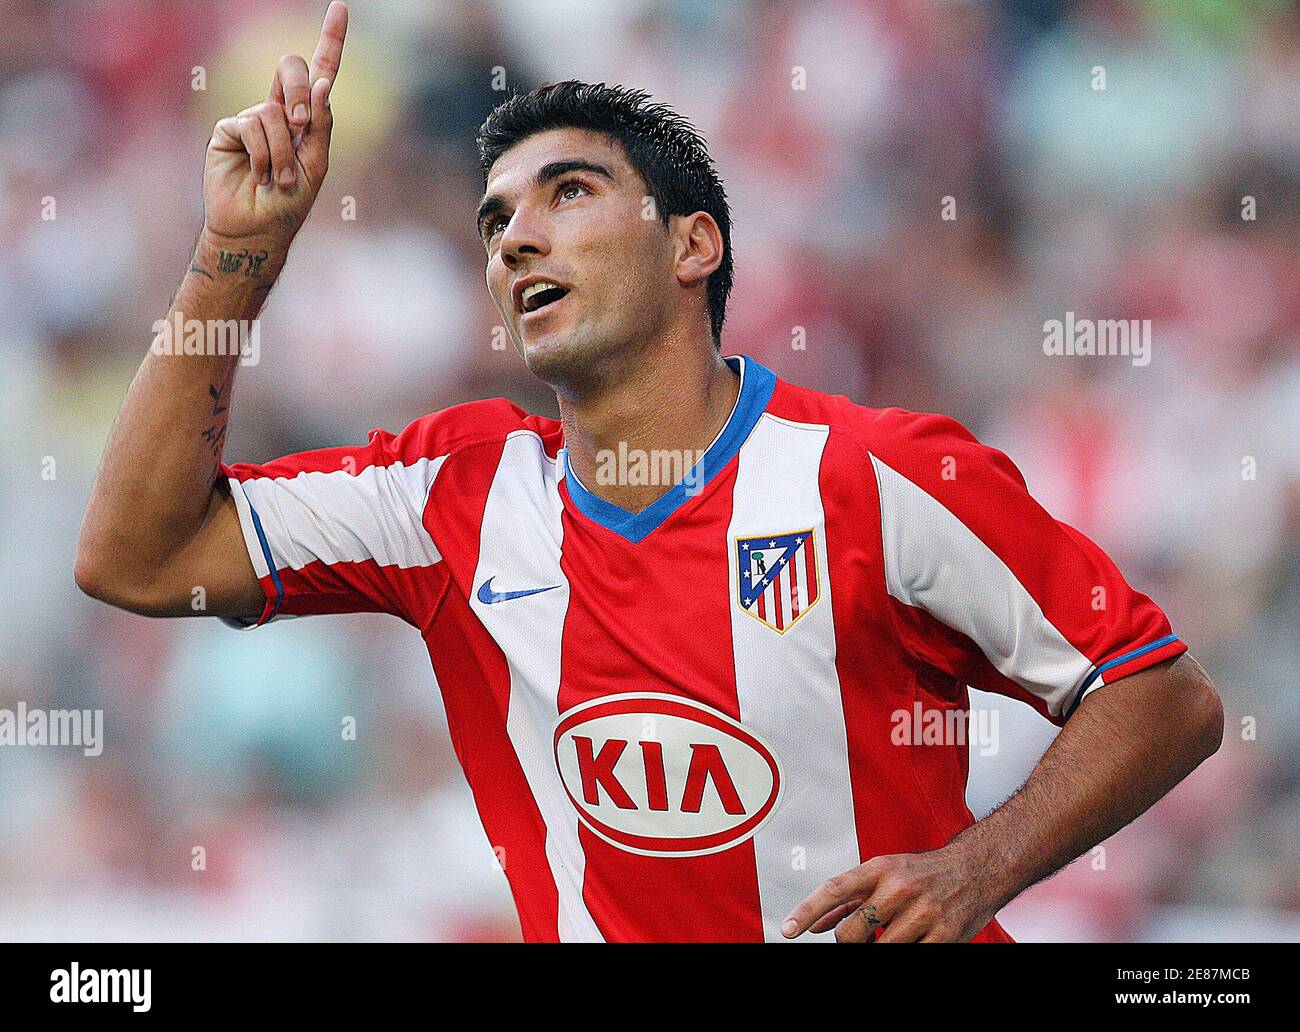 Atletico Madrid's Jose Antonio Reyes celebrates scoring against Lazio at  the LG Amsterdam soccer tournament in the Arena stadium in Amsterdam August  4, 2007. REUTERS/Toussaint Kluiters (THE NETHERLANDS Stock Photo - Alamy